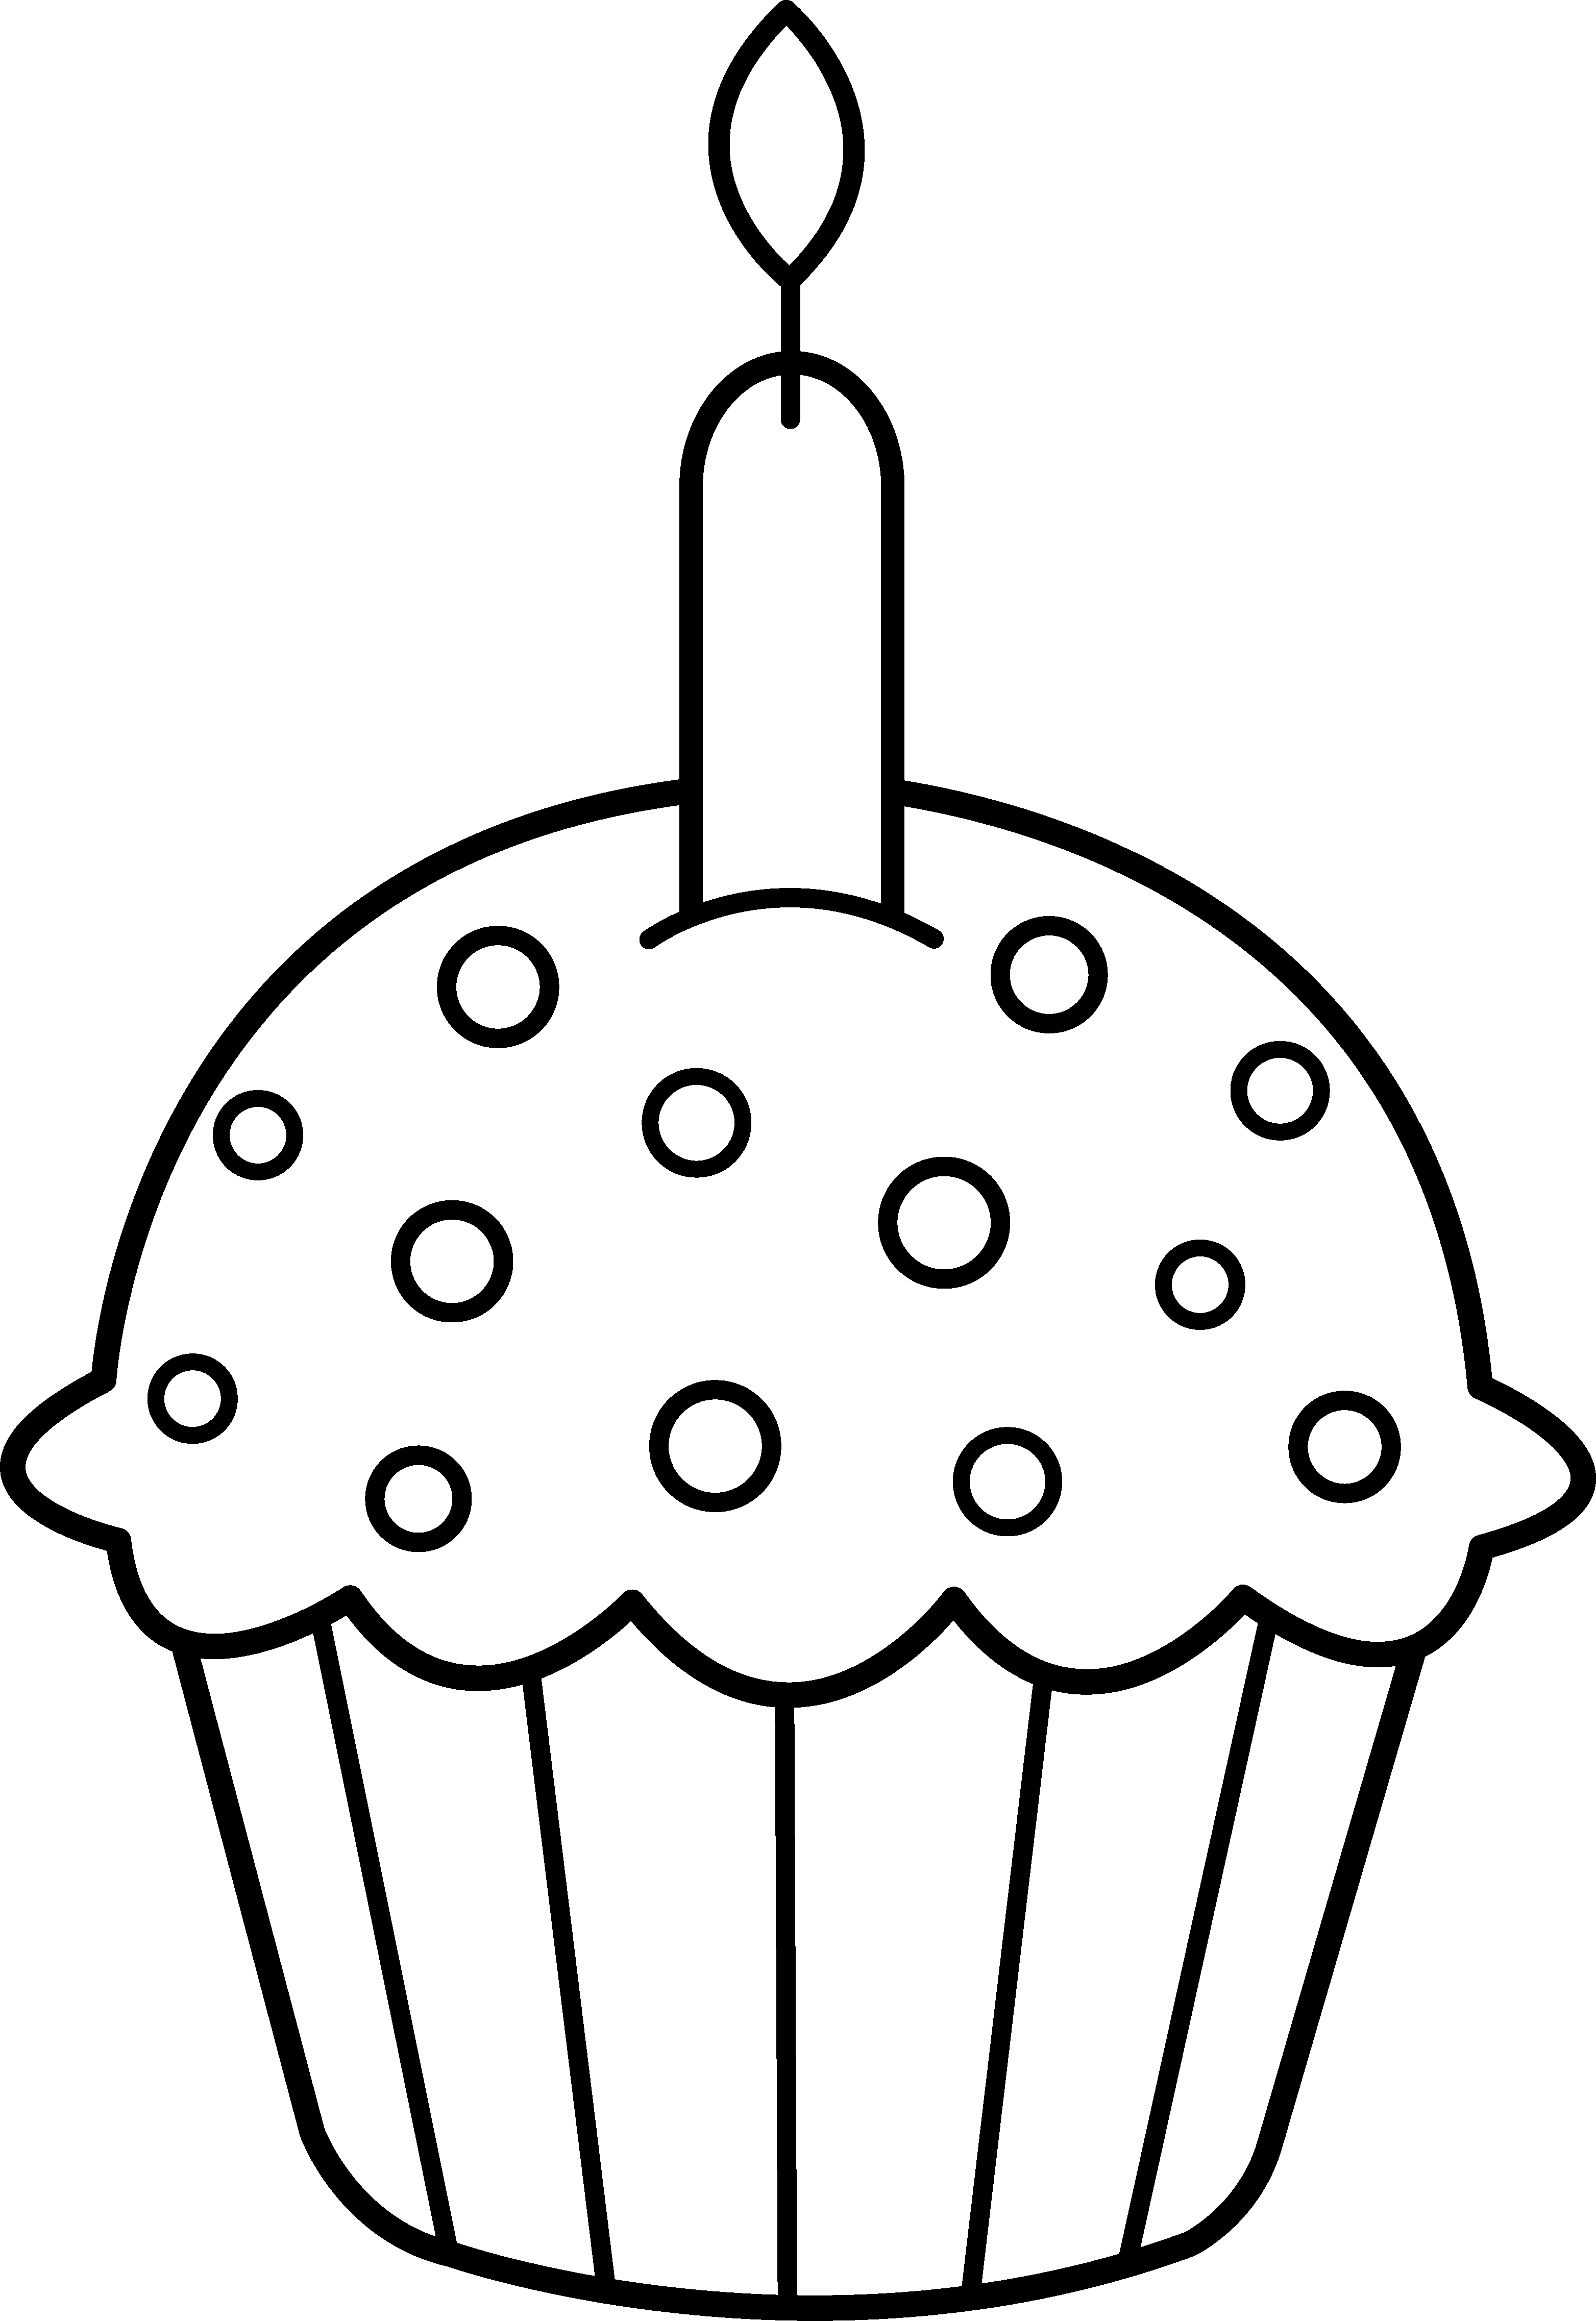 Cupcakes clipart cap.  collection of birthday